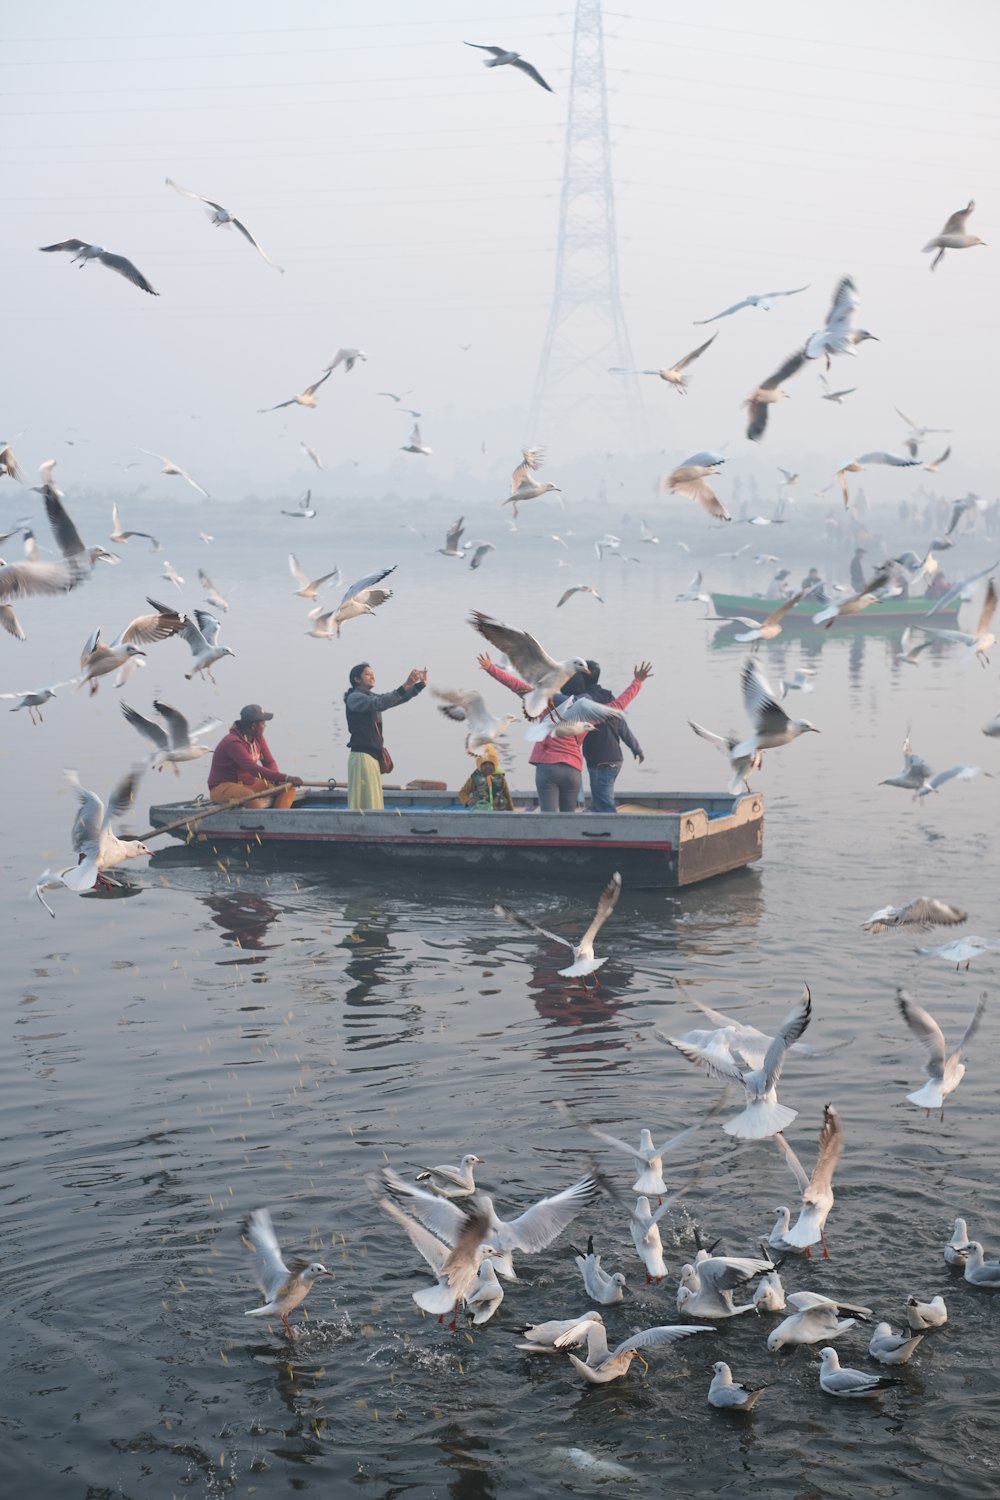 a group of people in a boat surrounded by seagulls